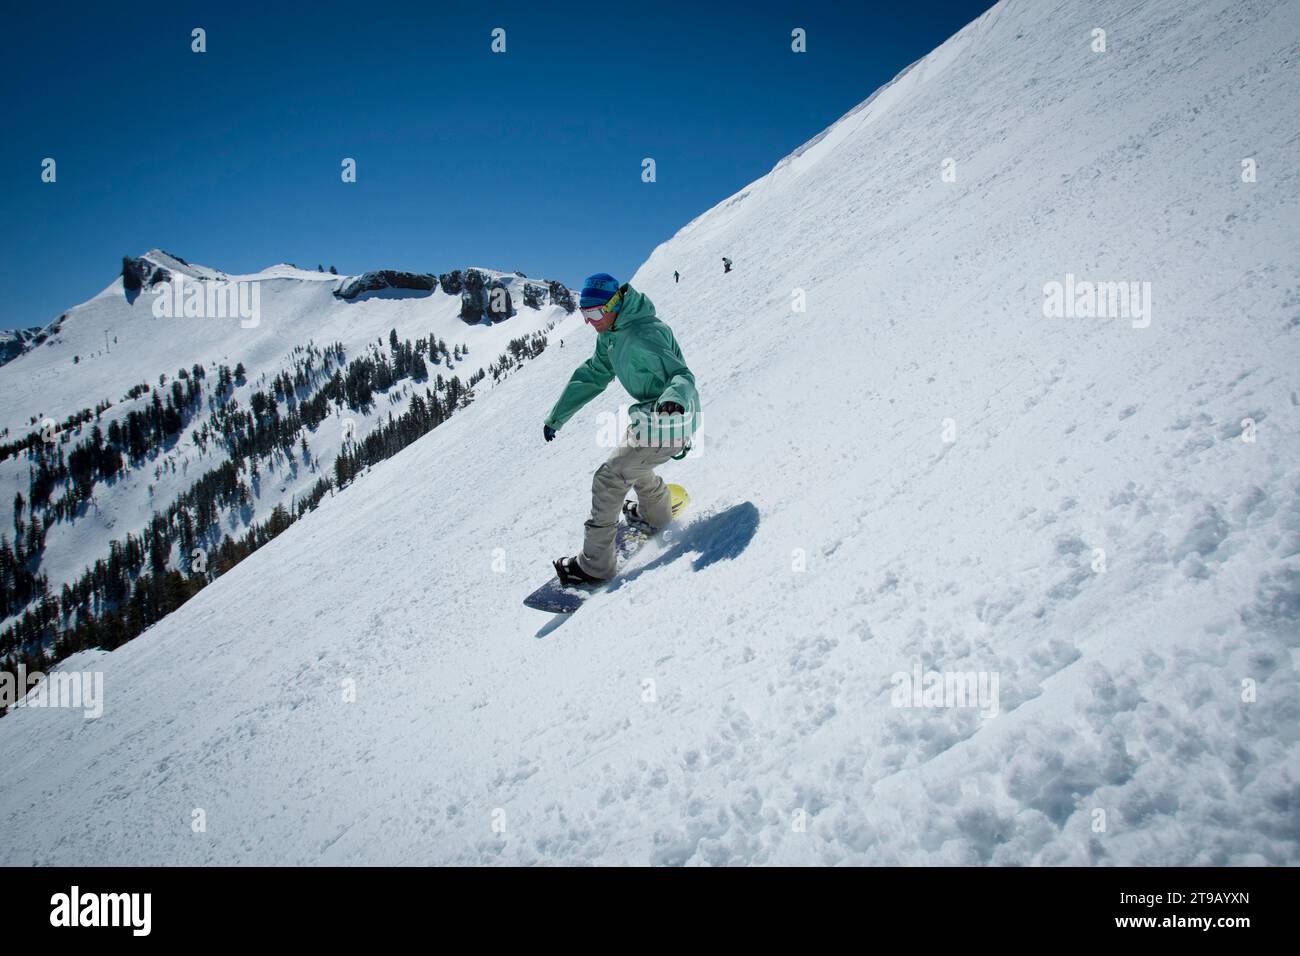 Snowboarder riding spring conditions with a nice view. Stock Photo